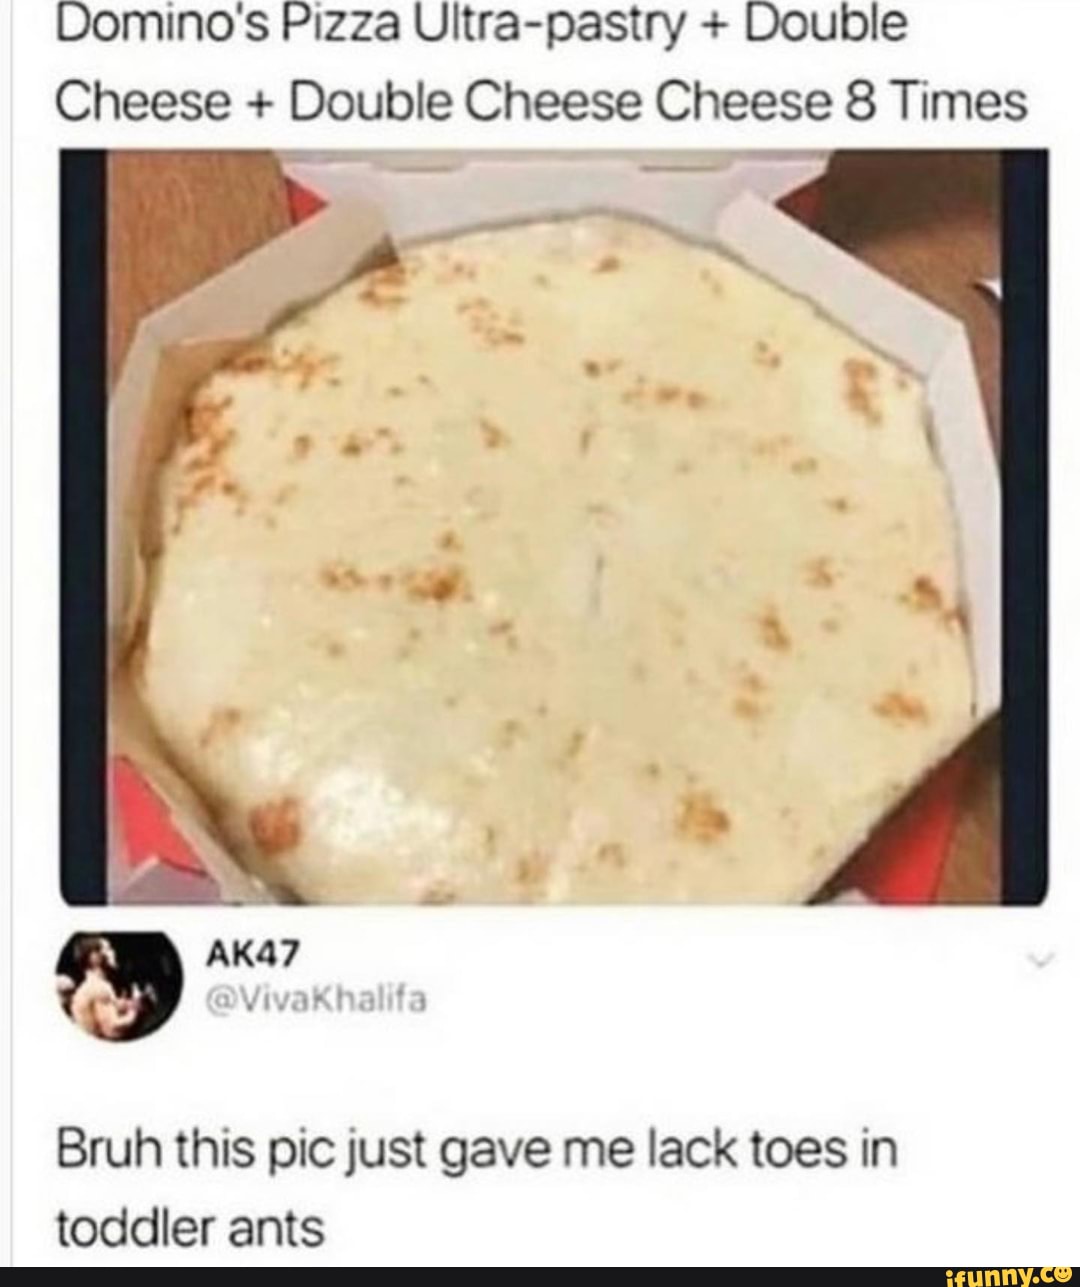 Bygger indstudering lugt A Tour Into my Memes Fabric - Domino's Pizza Ultra-pastry + Double Cheese +  Double Cheese Cheese 8 Times ARA? Bruh this pic just gave me lack toes in  toddler ants - )